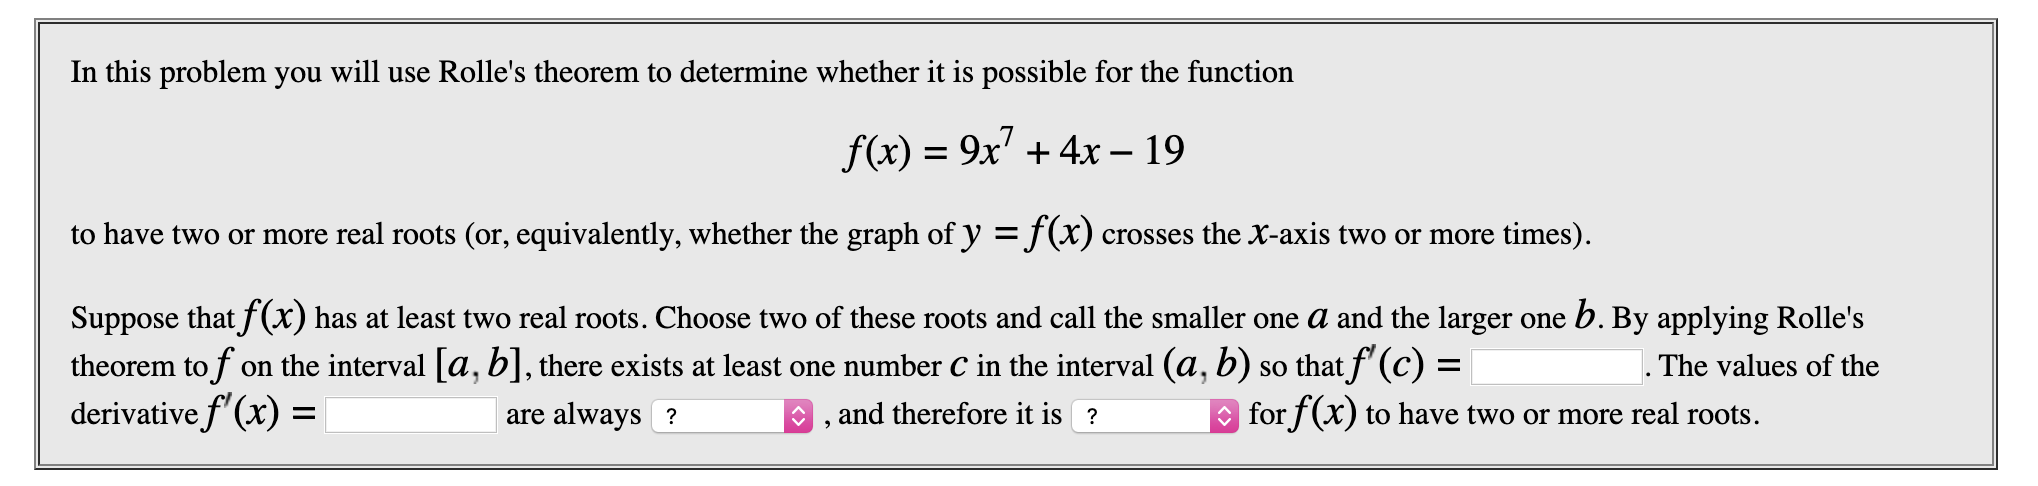 In this problem you will use Rolle's theorem to determine whether it is possible for the function
f(x) 9x4x- 19
to have two or more real roots (or, equivalently, whether the graph of y =f(x) crosses the X-axis two or more times)
Suppose thatf (x) has at least two real roots. Choose two of these roots and call the smaller one a and the larger one b. By applying Rolle's
theorem tof on the interval a, b], there exists at least one number C in the interval (a, b) so thatf (c) =
derivative f (x)
The values of the
and therefore it is?
for f(x) to have two or more real roots.
are always ?
